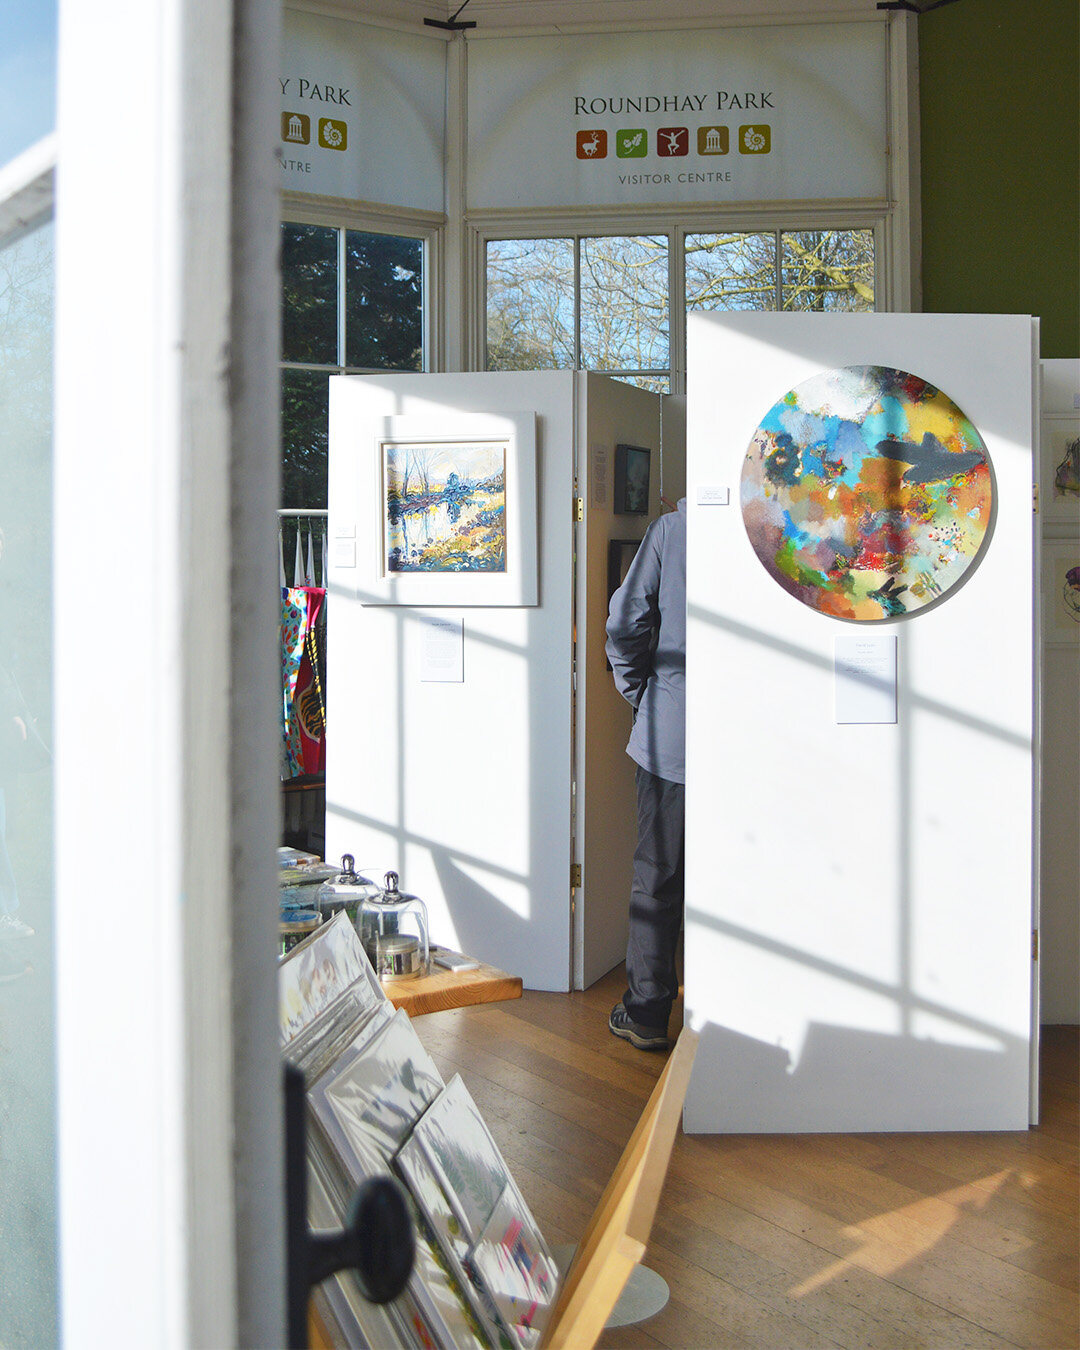 Sarah Garforth and David Lyon's artworks beaming in the sunlight this Spring 🌞

(Left artwork) @sarahgarforthart, who is new to exhibit at the gallery, creates artwork with intense texture which reflects her rural location including rivers and reser